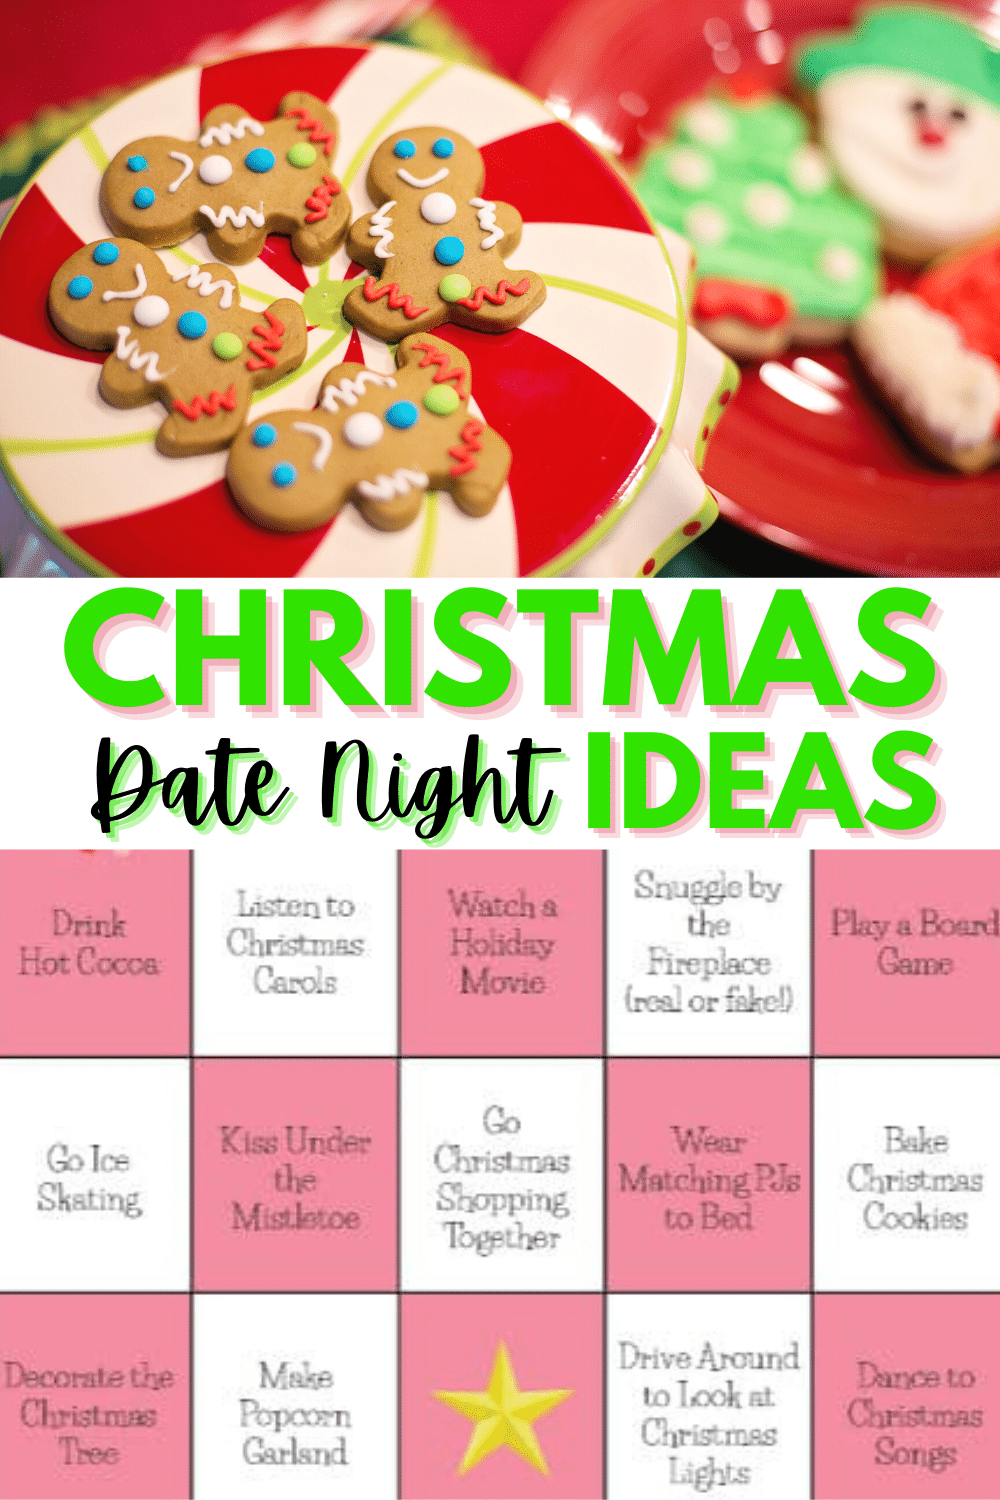 Finding unique Christmas Date Ideas is easy with this fun bingo-style printable. It is worth it to make time for your relationship during the holidays. #christmasdates #printables #christmasprintables via @wondermomwannab